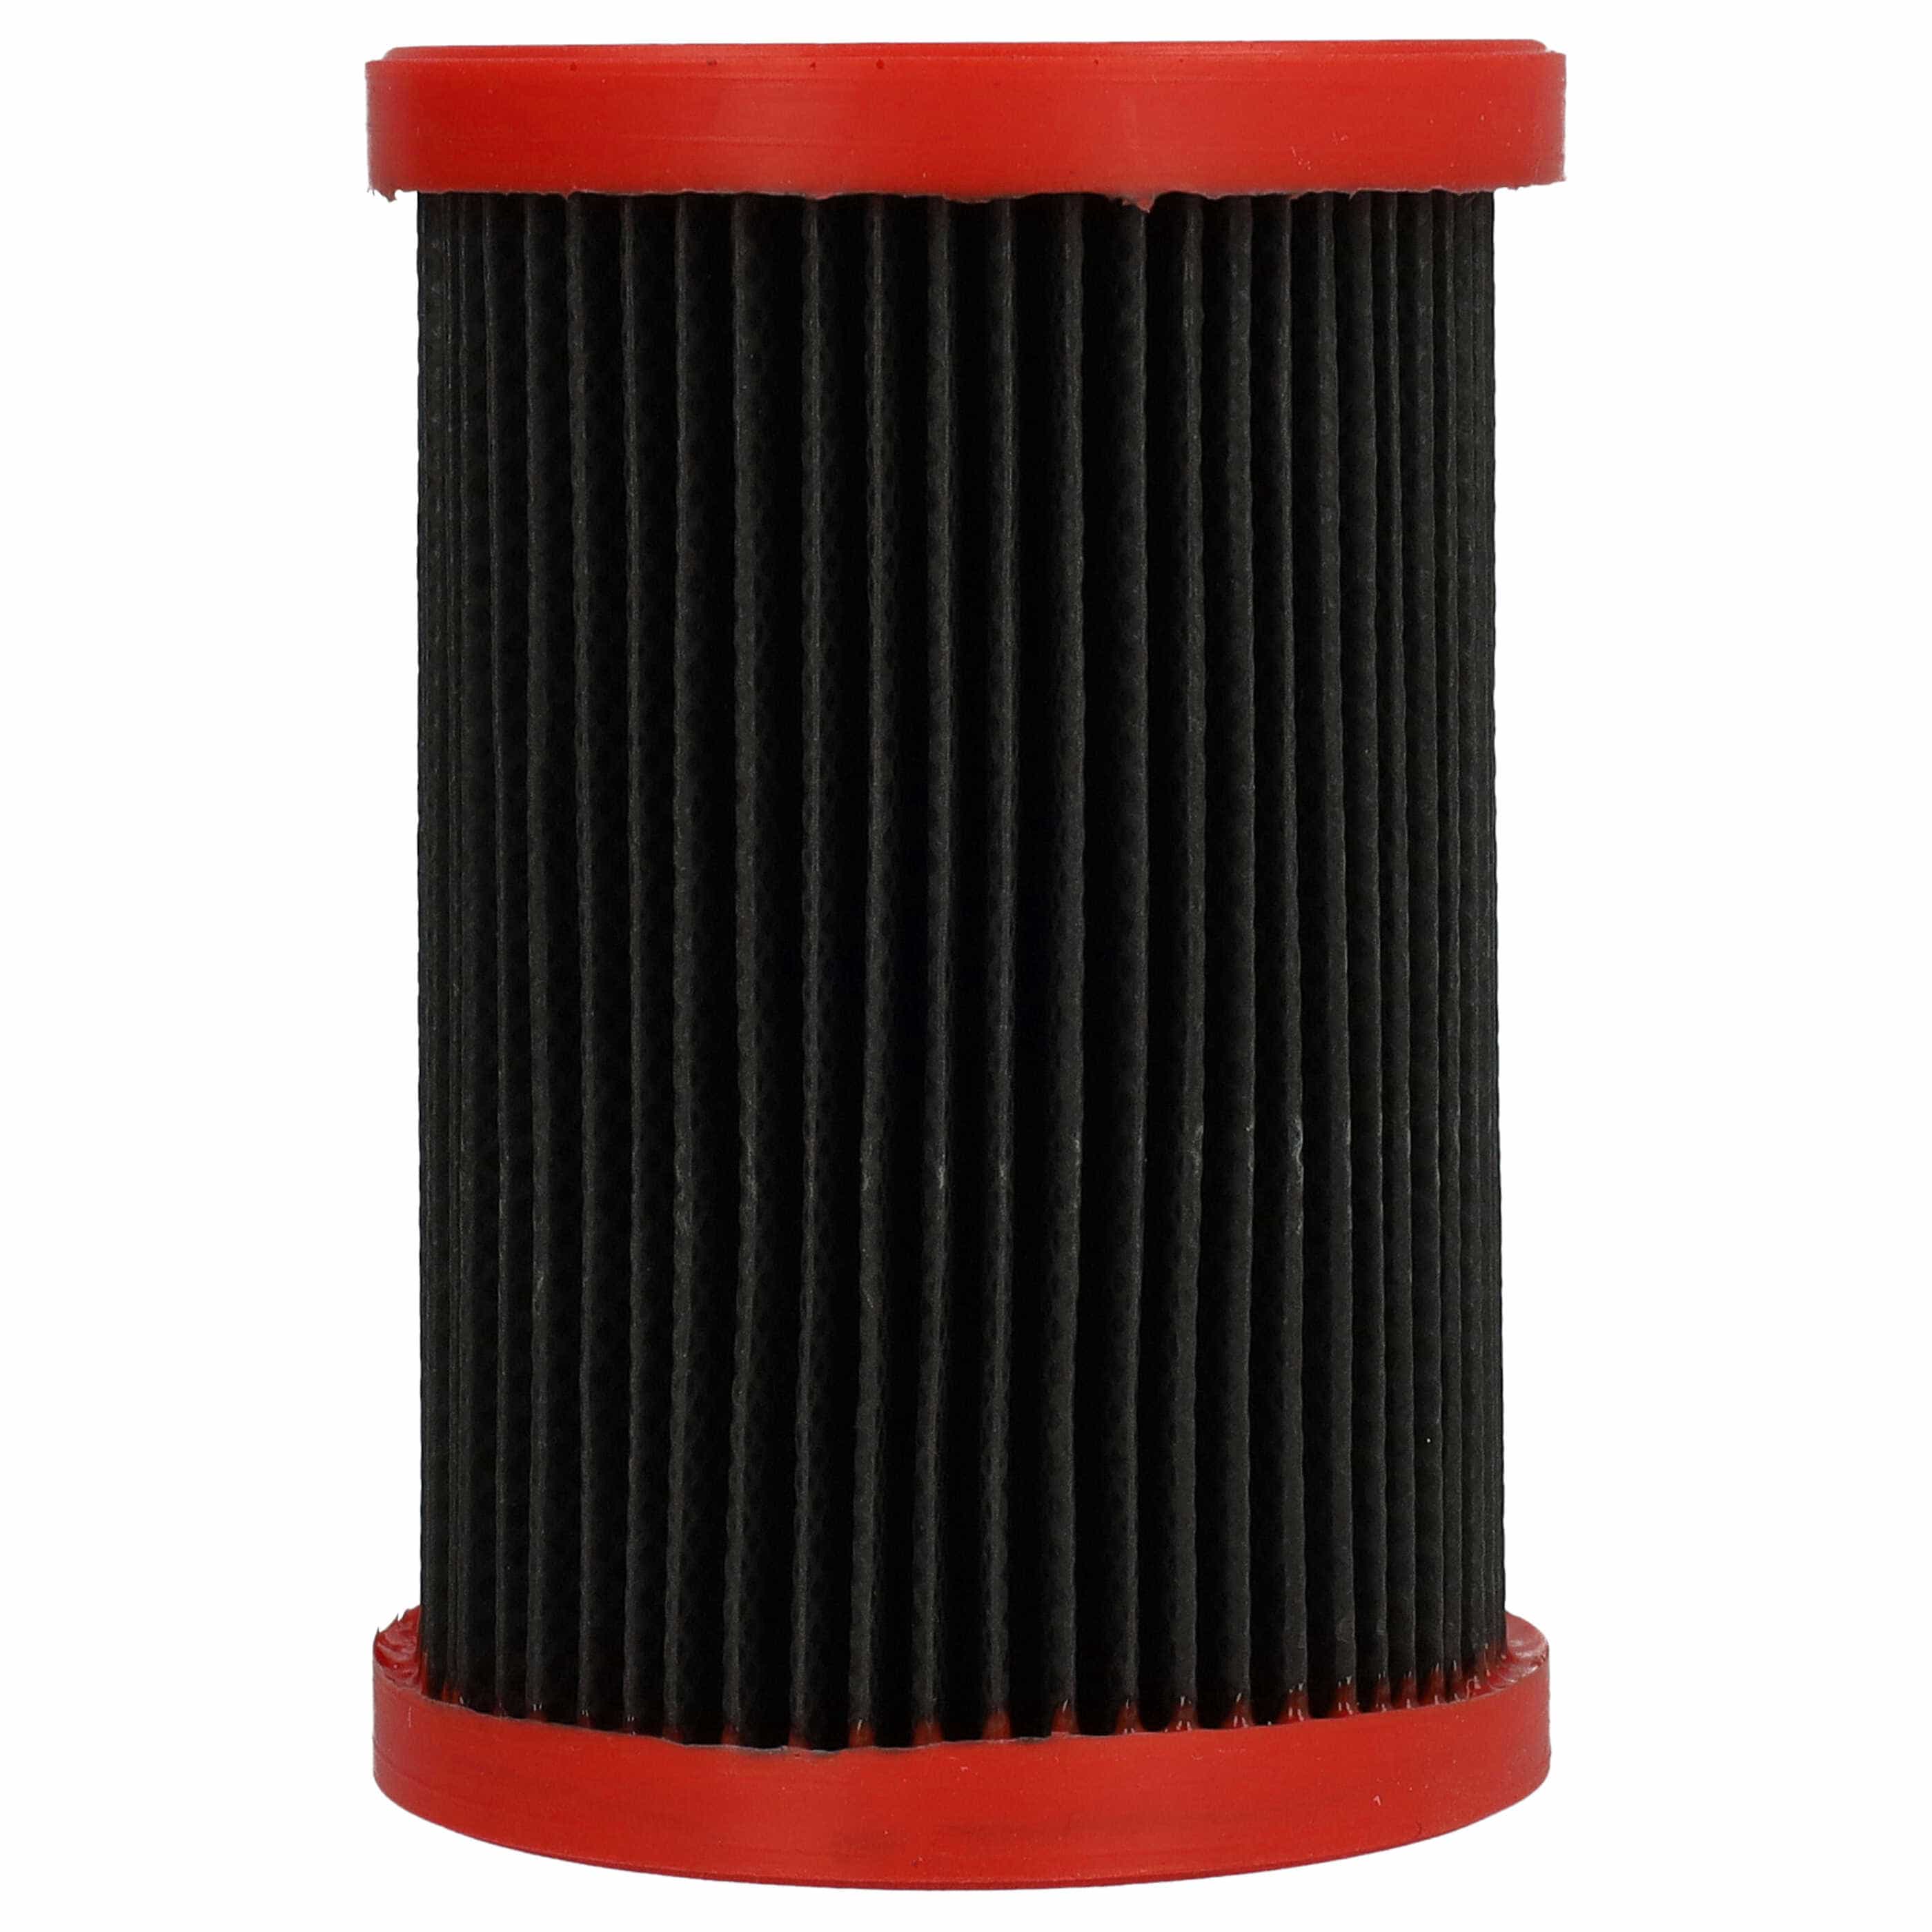 1x air filter replaces LG G785954 for LG Vacuum Cleaner, black